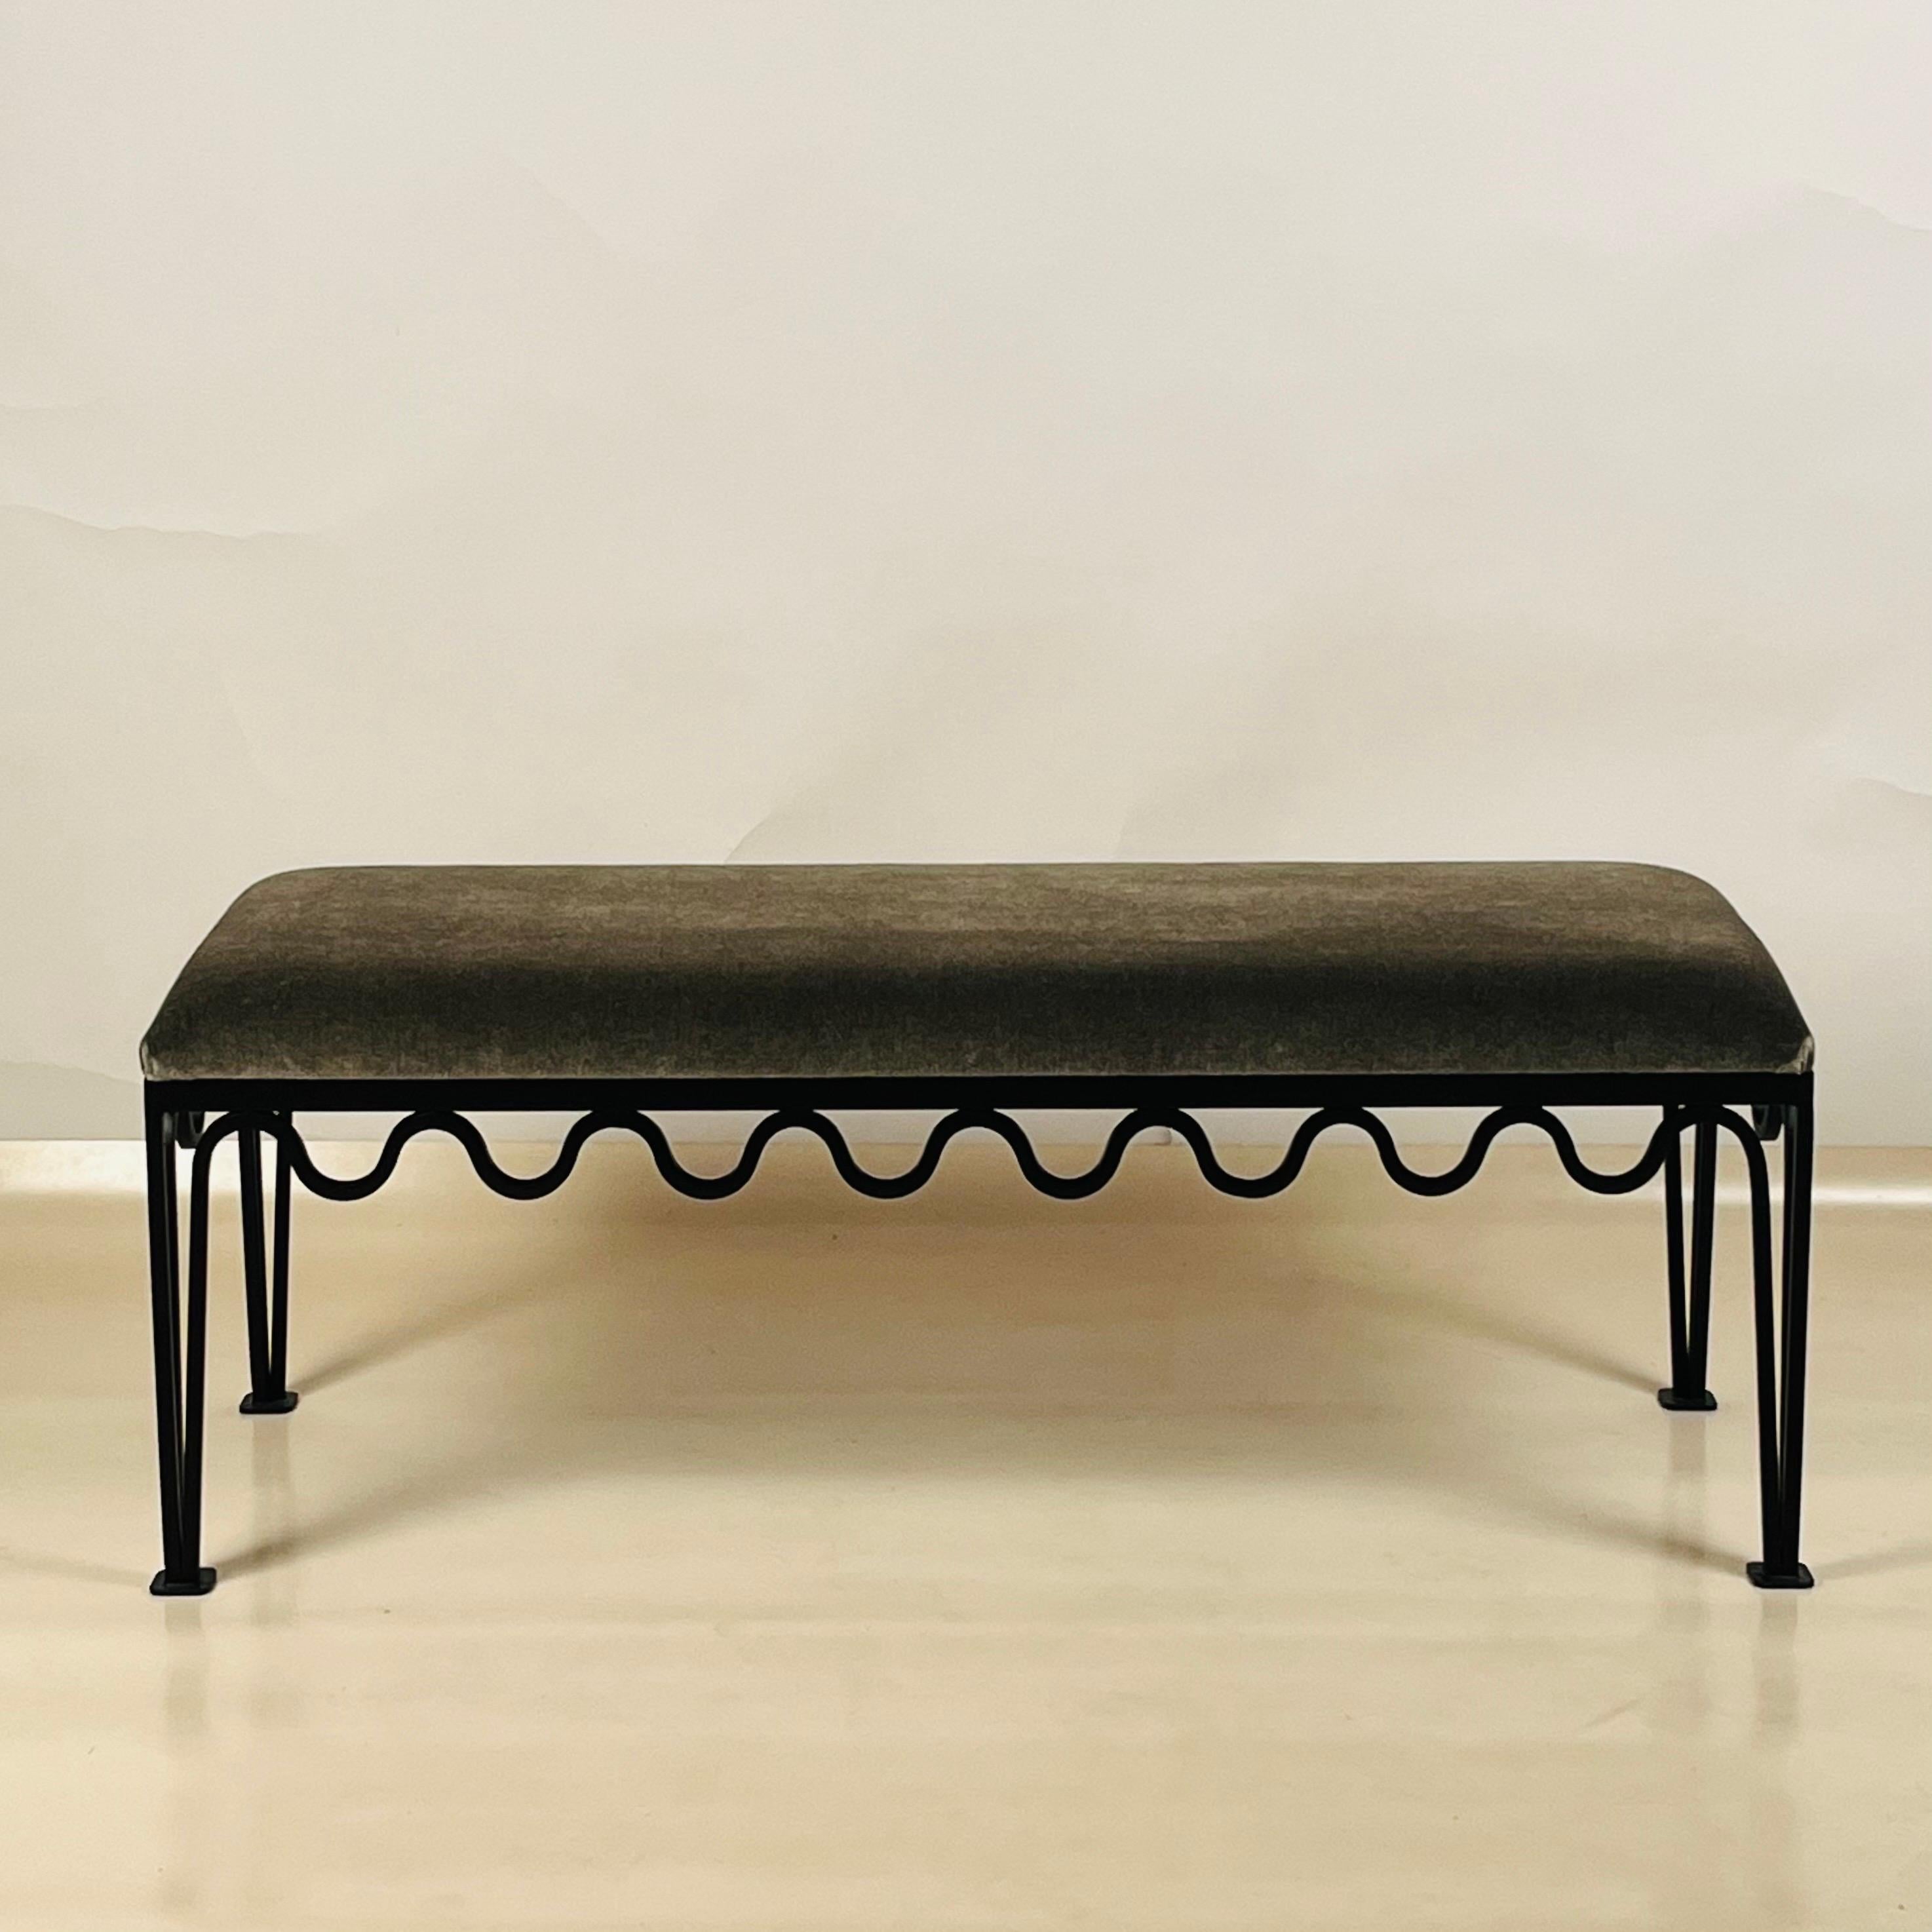 Contemporary In-Stock 'Méandre' Bench by Design Frères in Mohair Velvet For Sale